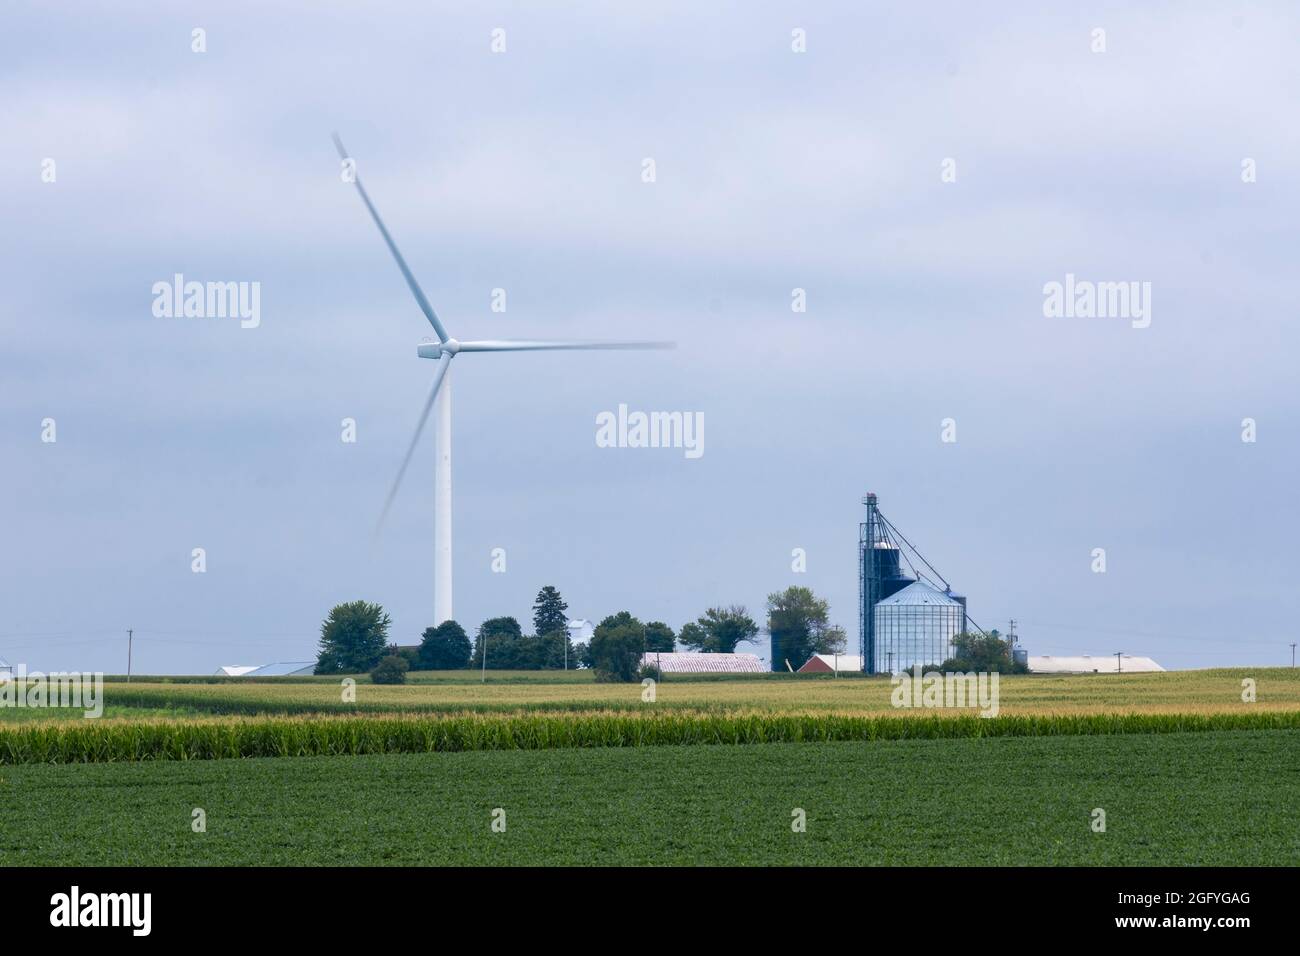 Near Earlville, Iowa.  Windmill Blades Rotate Slowly behind and Grain Storage Bins. Soy Beans and Cornfield in foreground. Stock Photo